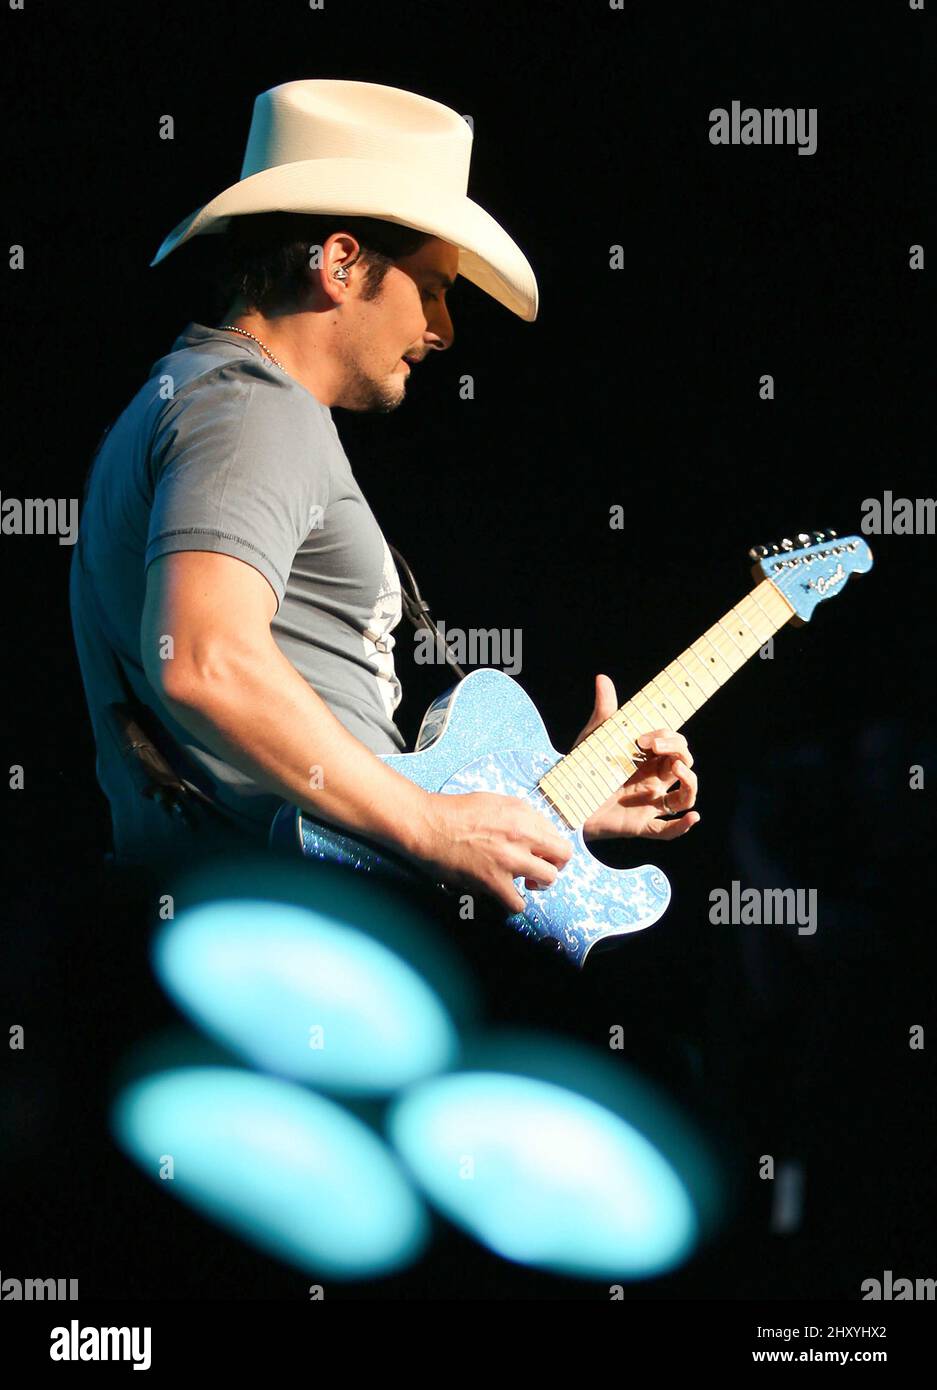 Brad Paisley on stage during the Virtual Reality World Tour 2012 at Bethel Woods Center for the Arts. Stock Photo